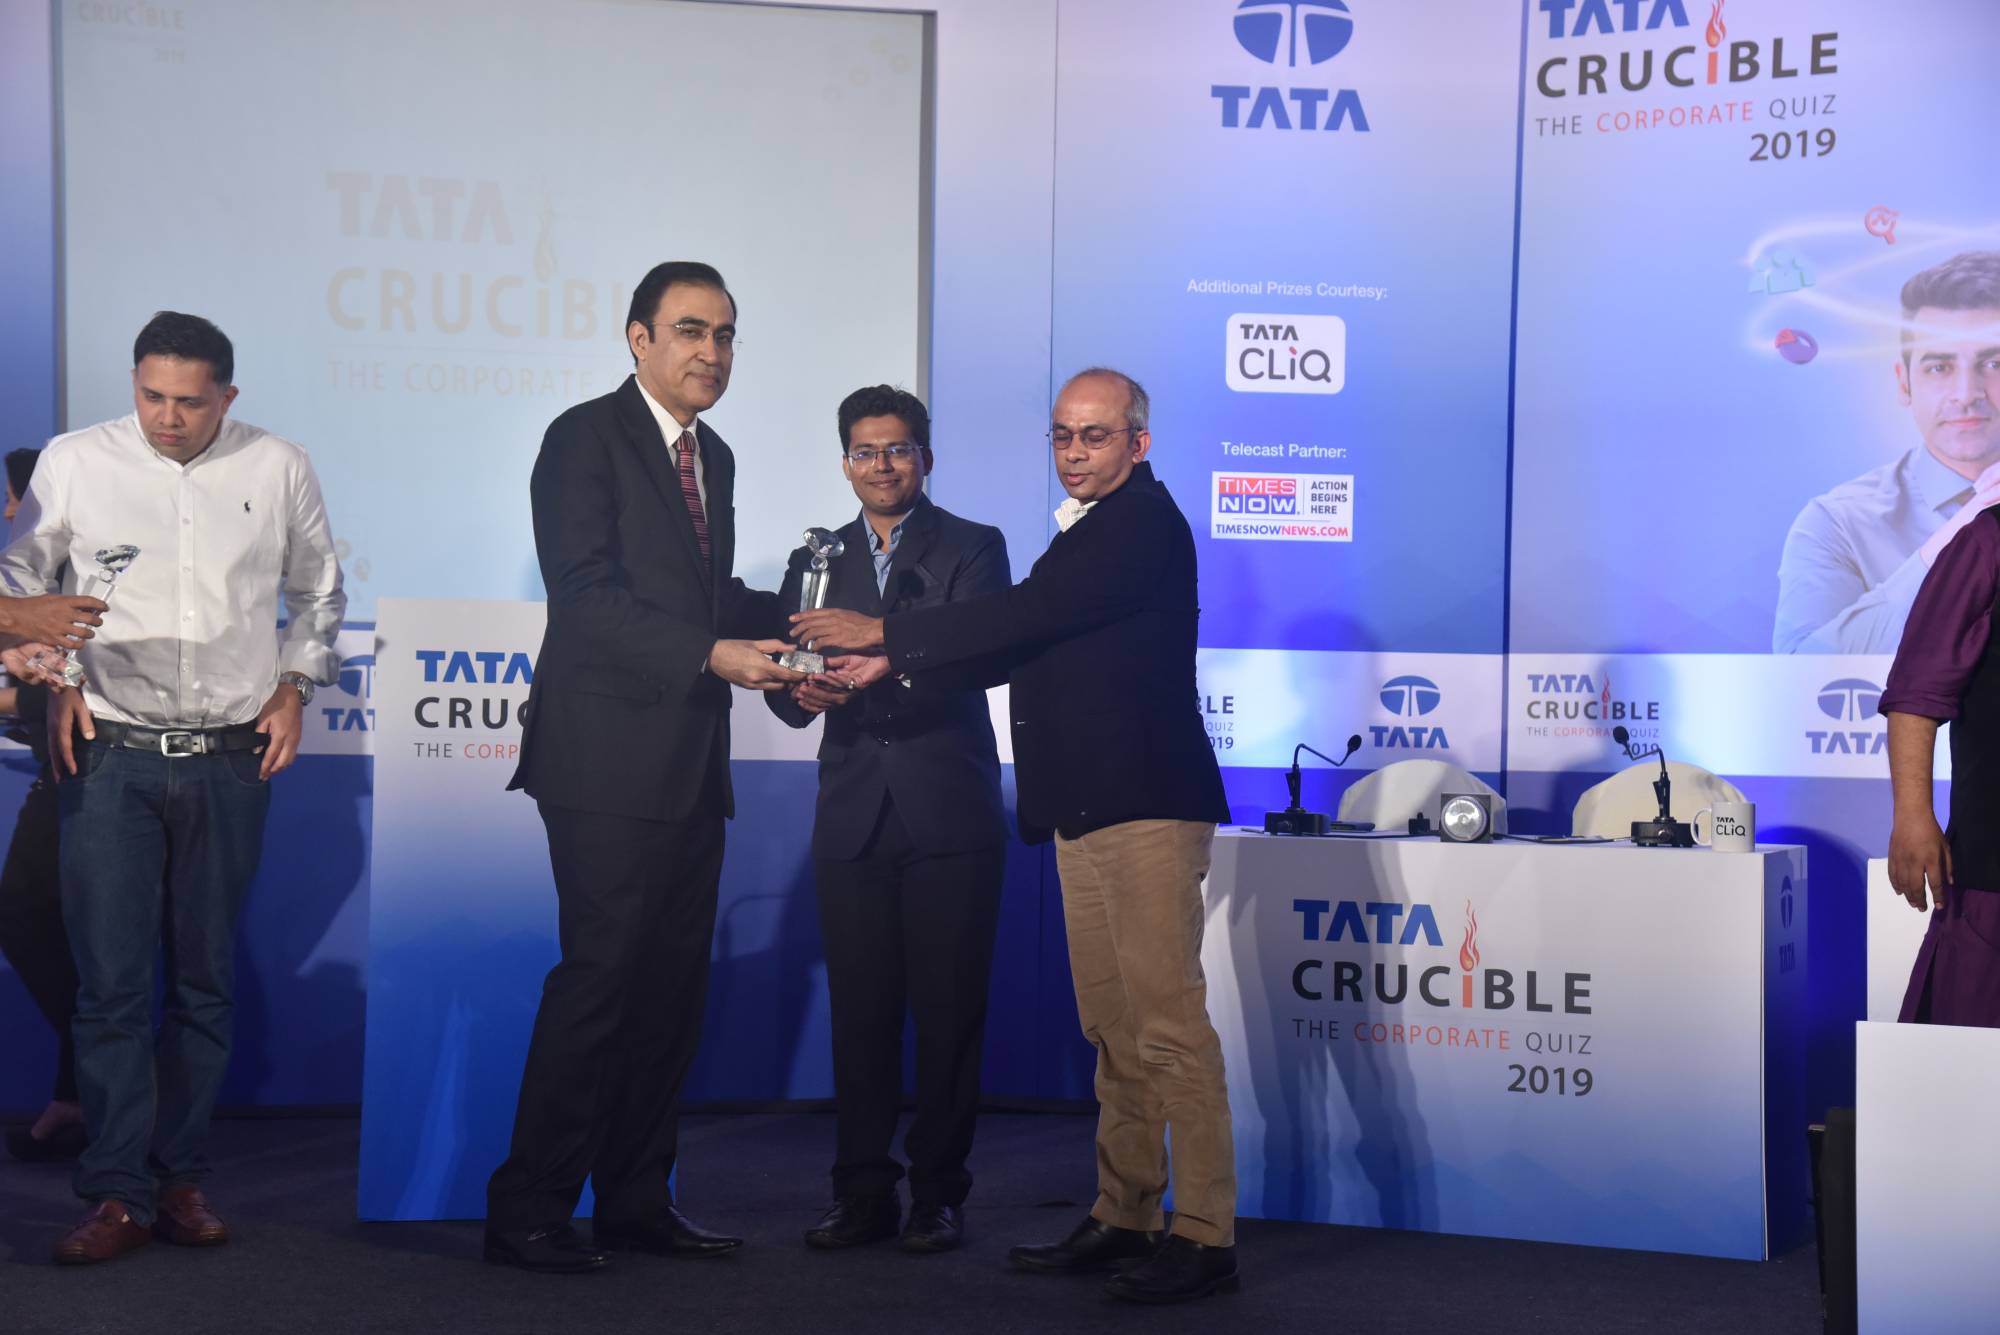 Tata Crucible Corporate Quiz Results For Runners - Savoire Faire 